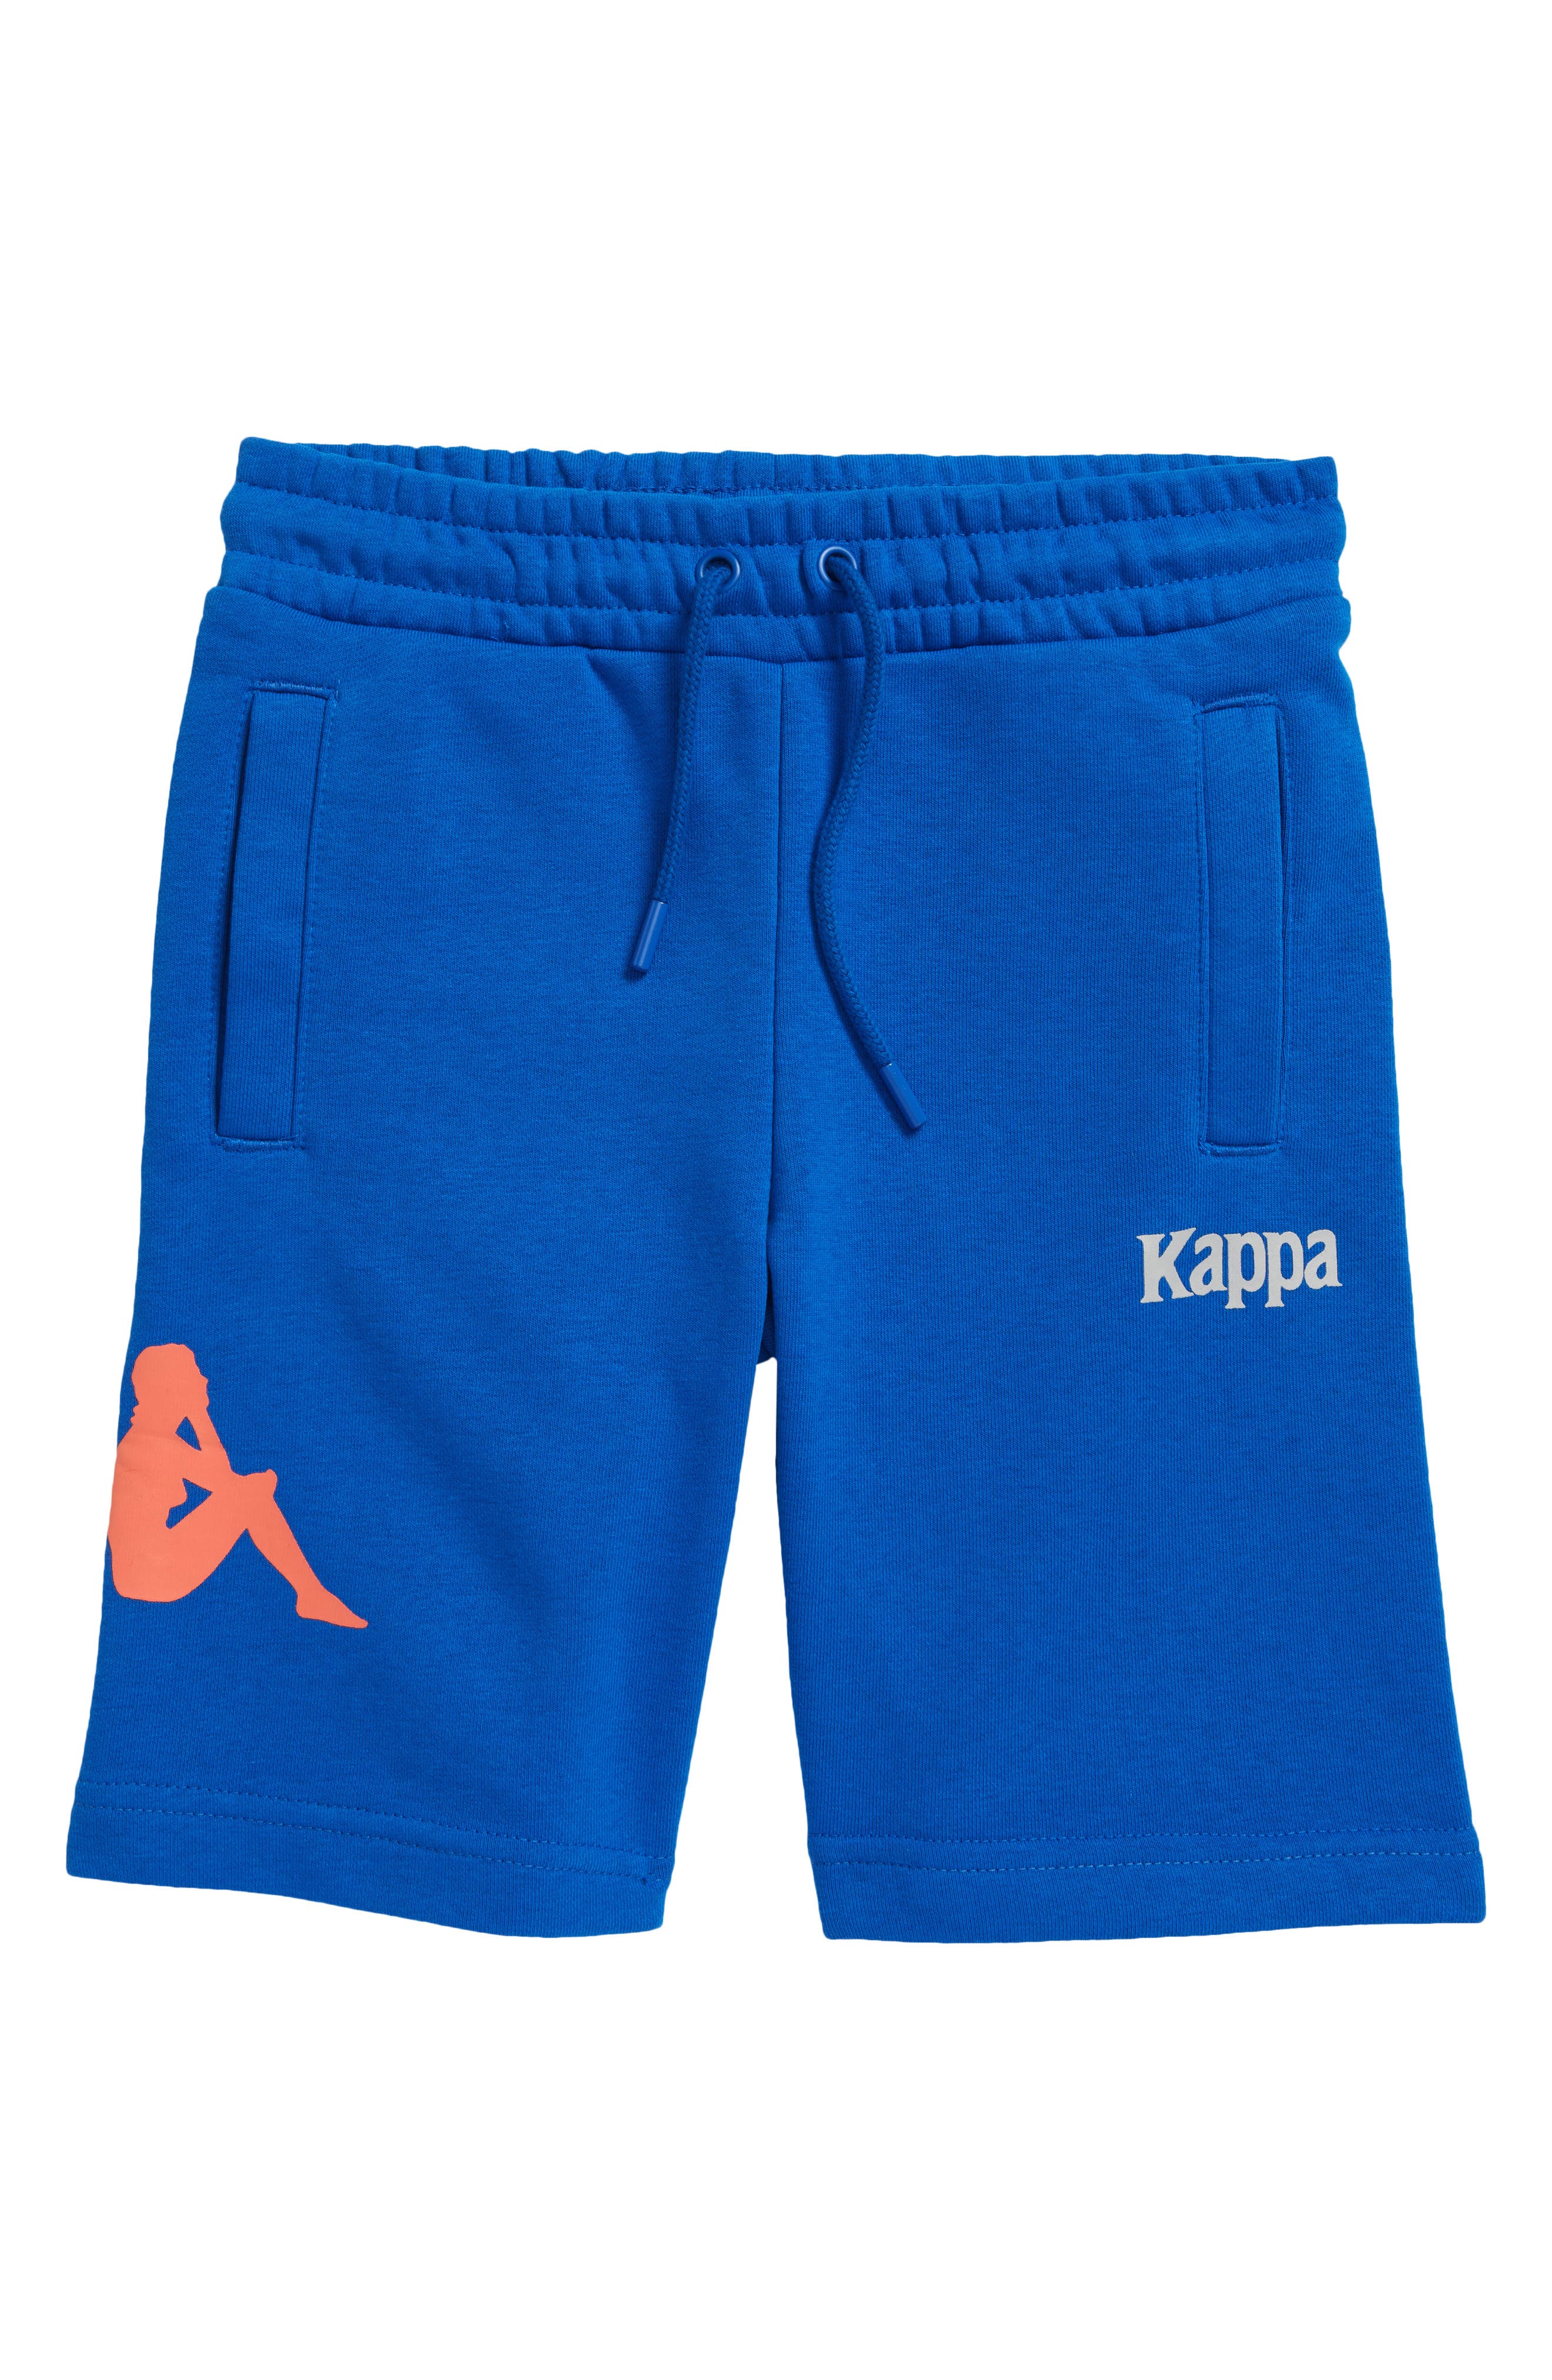 Kappa Kids' Authentic Sangone Shorts in Blue Lapis Green Lime at Nordstrom, Size 10Y Us